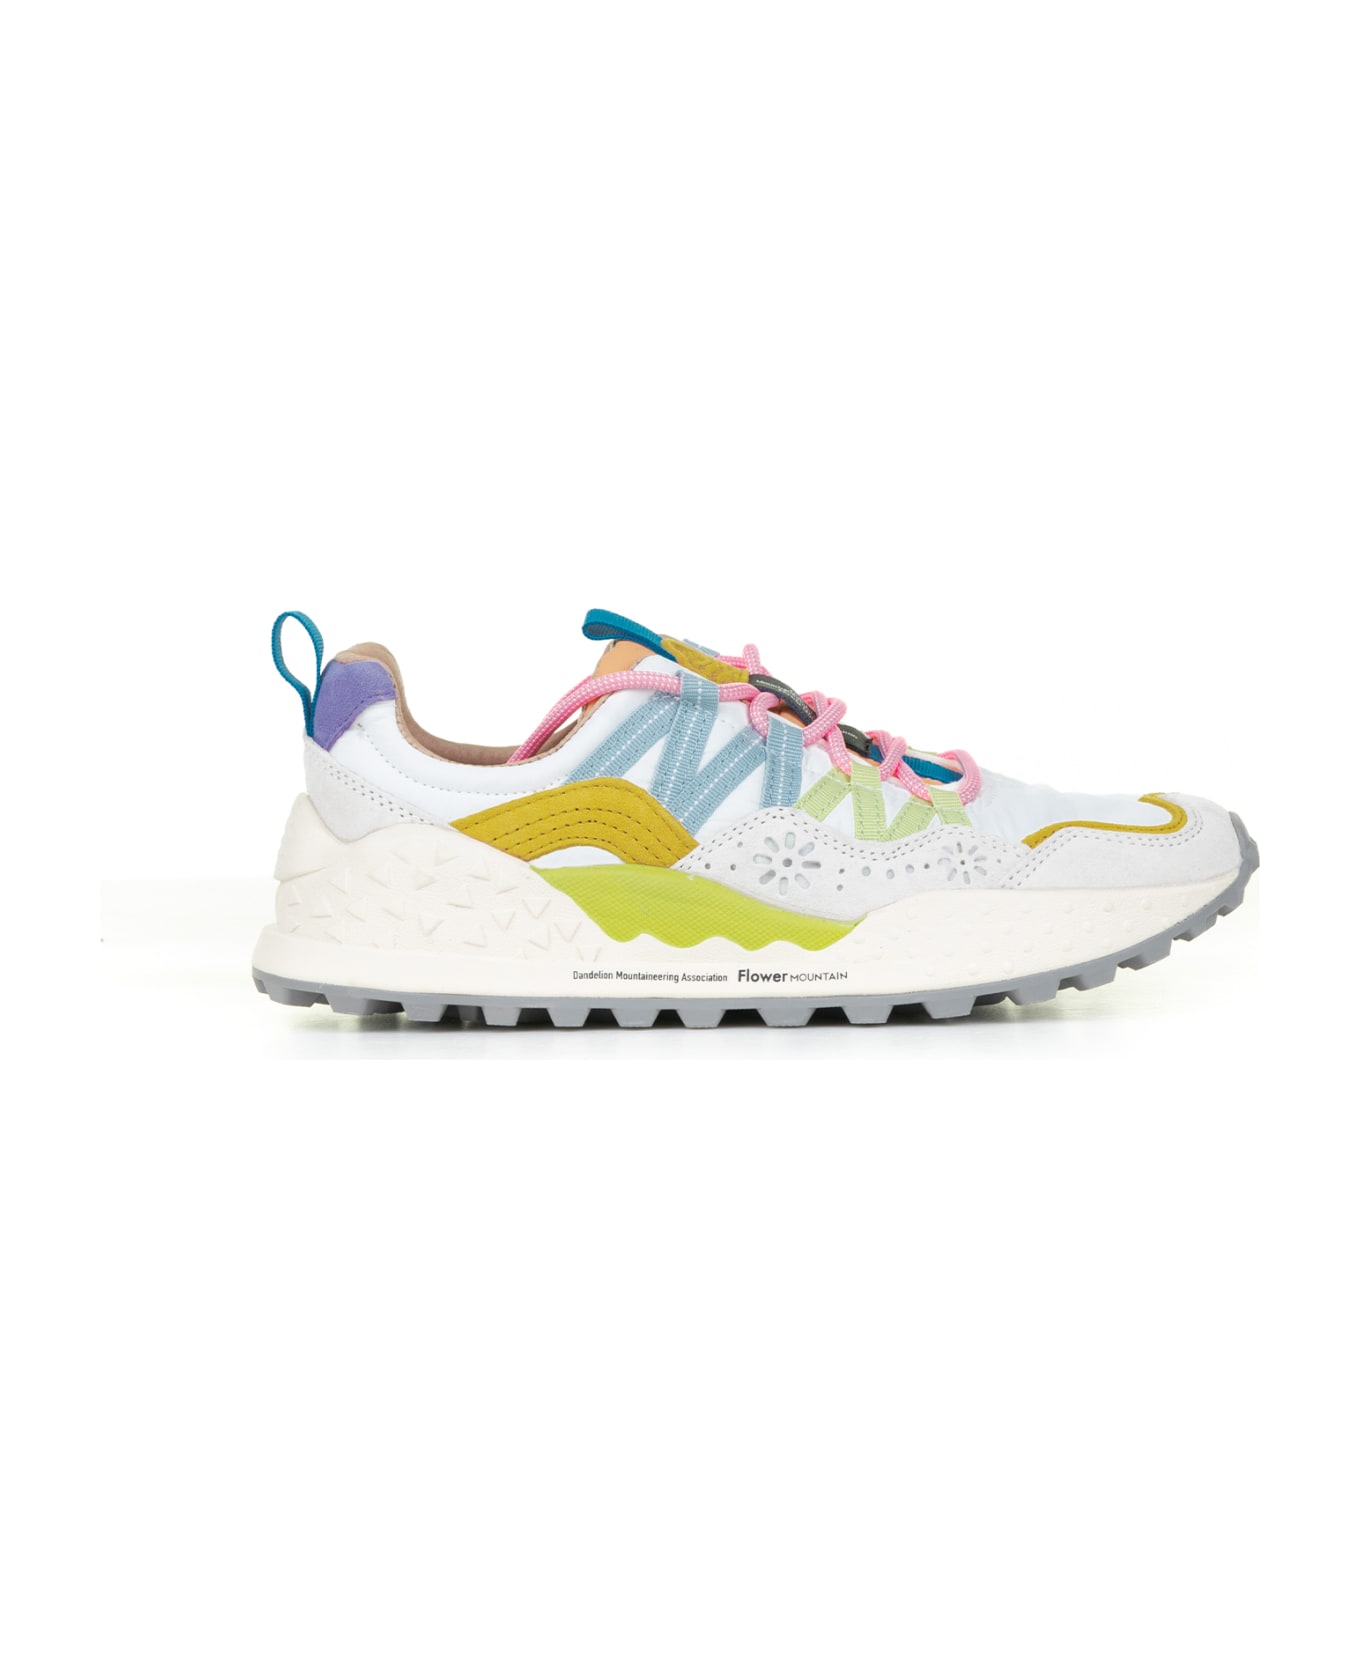 Flower Mountain Multicolored Washi Sneakers In Suede And Nylon - BEIGE WHITE MULTI スニーカー